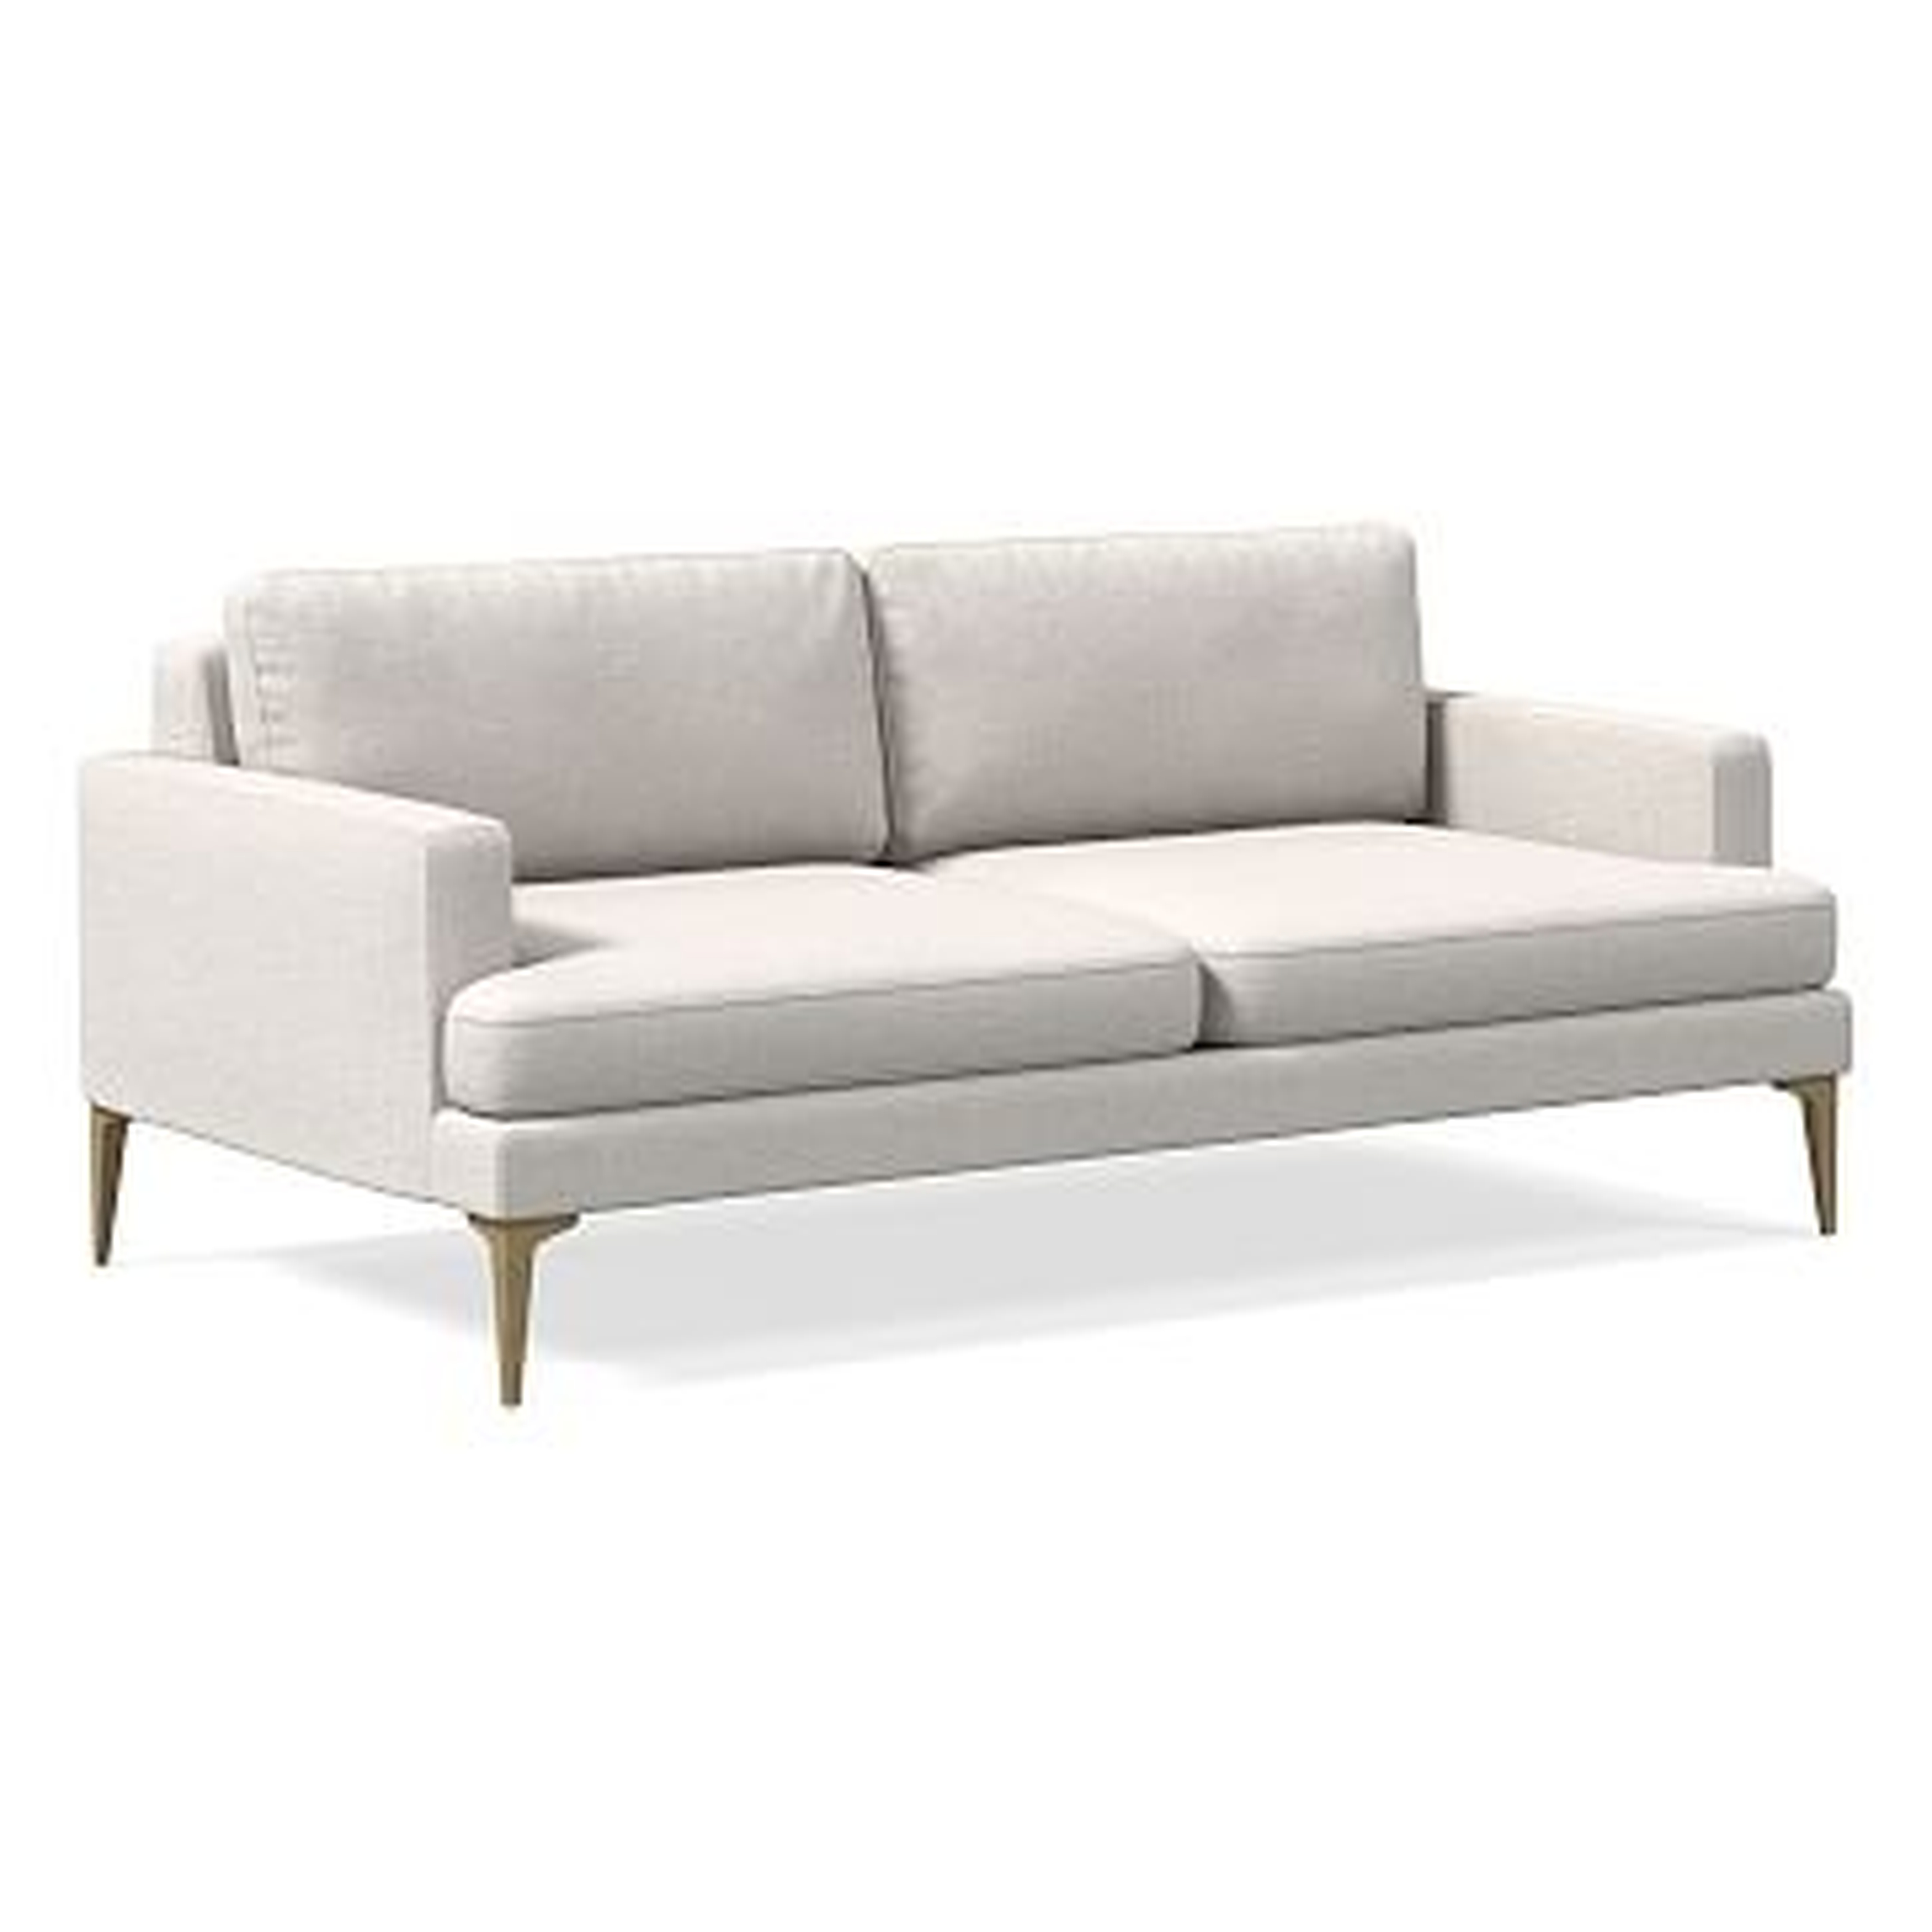 Andes 76.5" Sofa, Poly, Performance Coastal Linen, White, Blackened Brass - West Elm